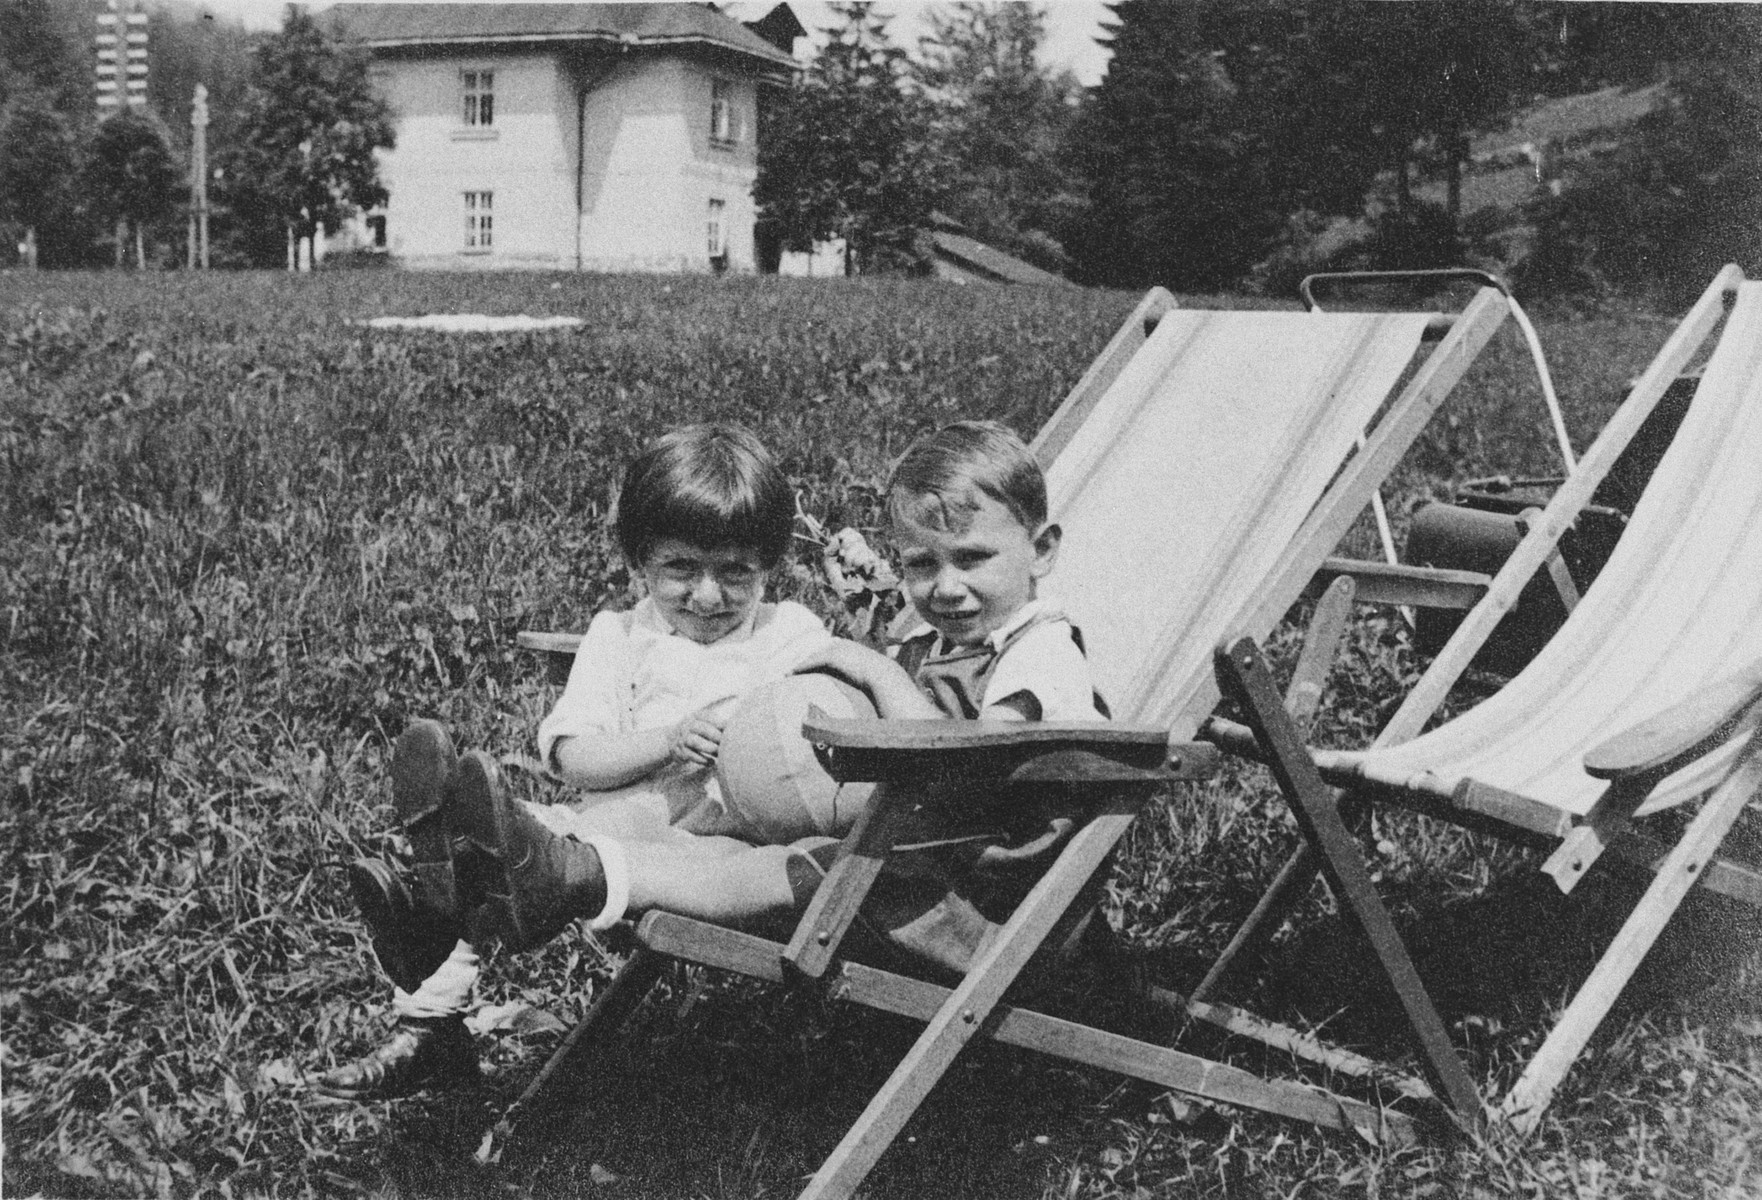 Two young children sit next to each other on canvas lawn chairs on a grassy field.

Pictured on the left is Misa Grunbaum.